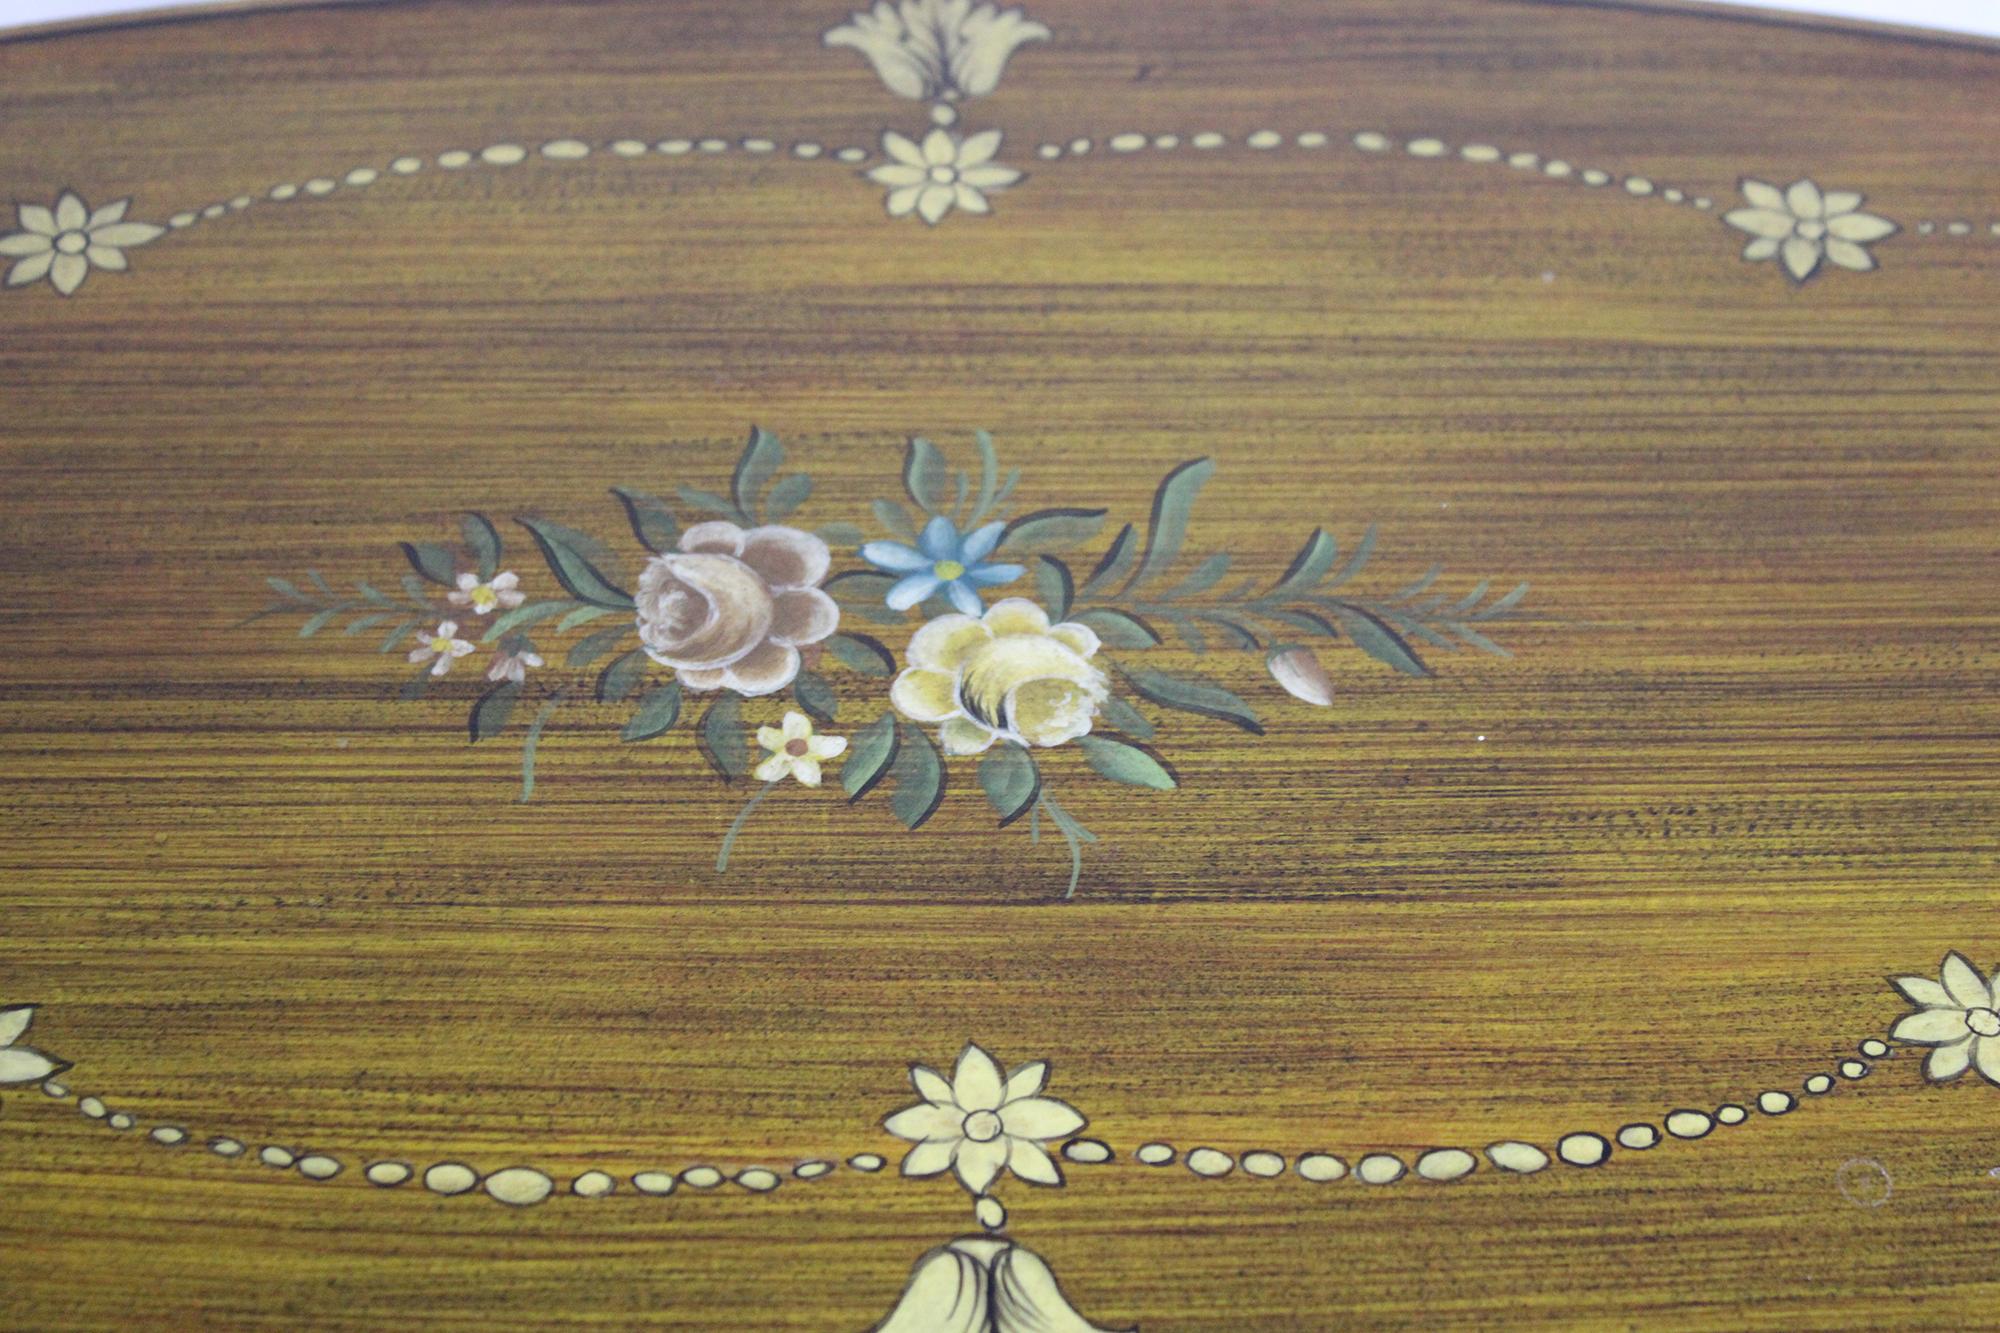 Sarreid Edwardian Oval Tray Top Étagère Table Sheraton Revival Floral Painted 35 For Sale 1